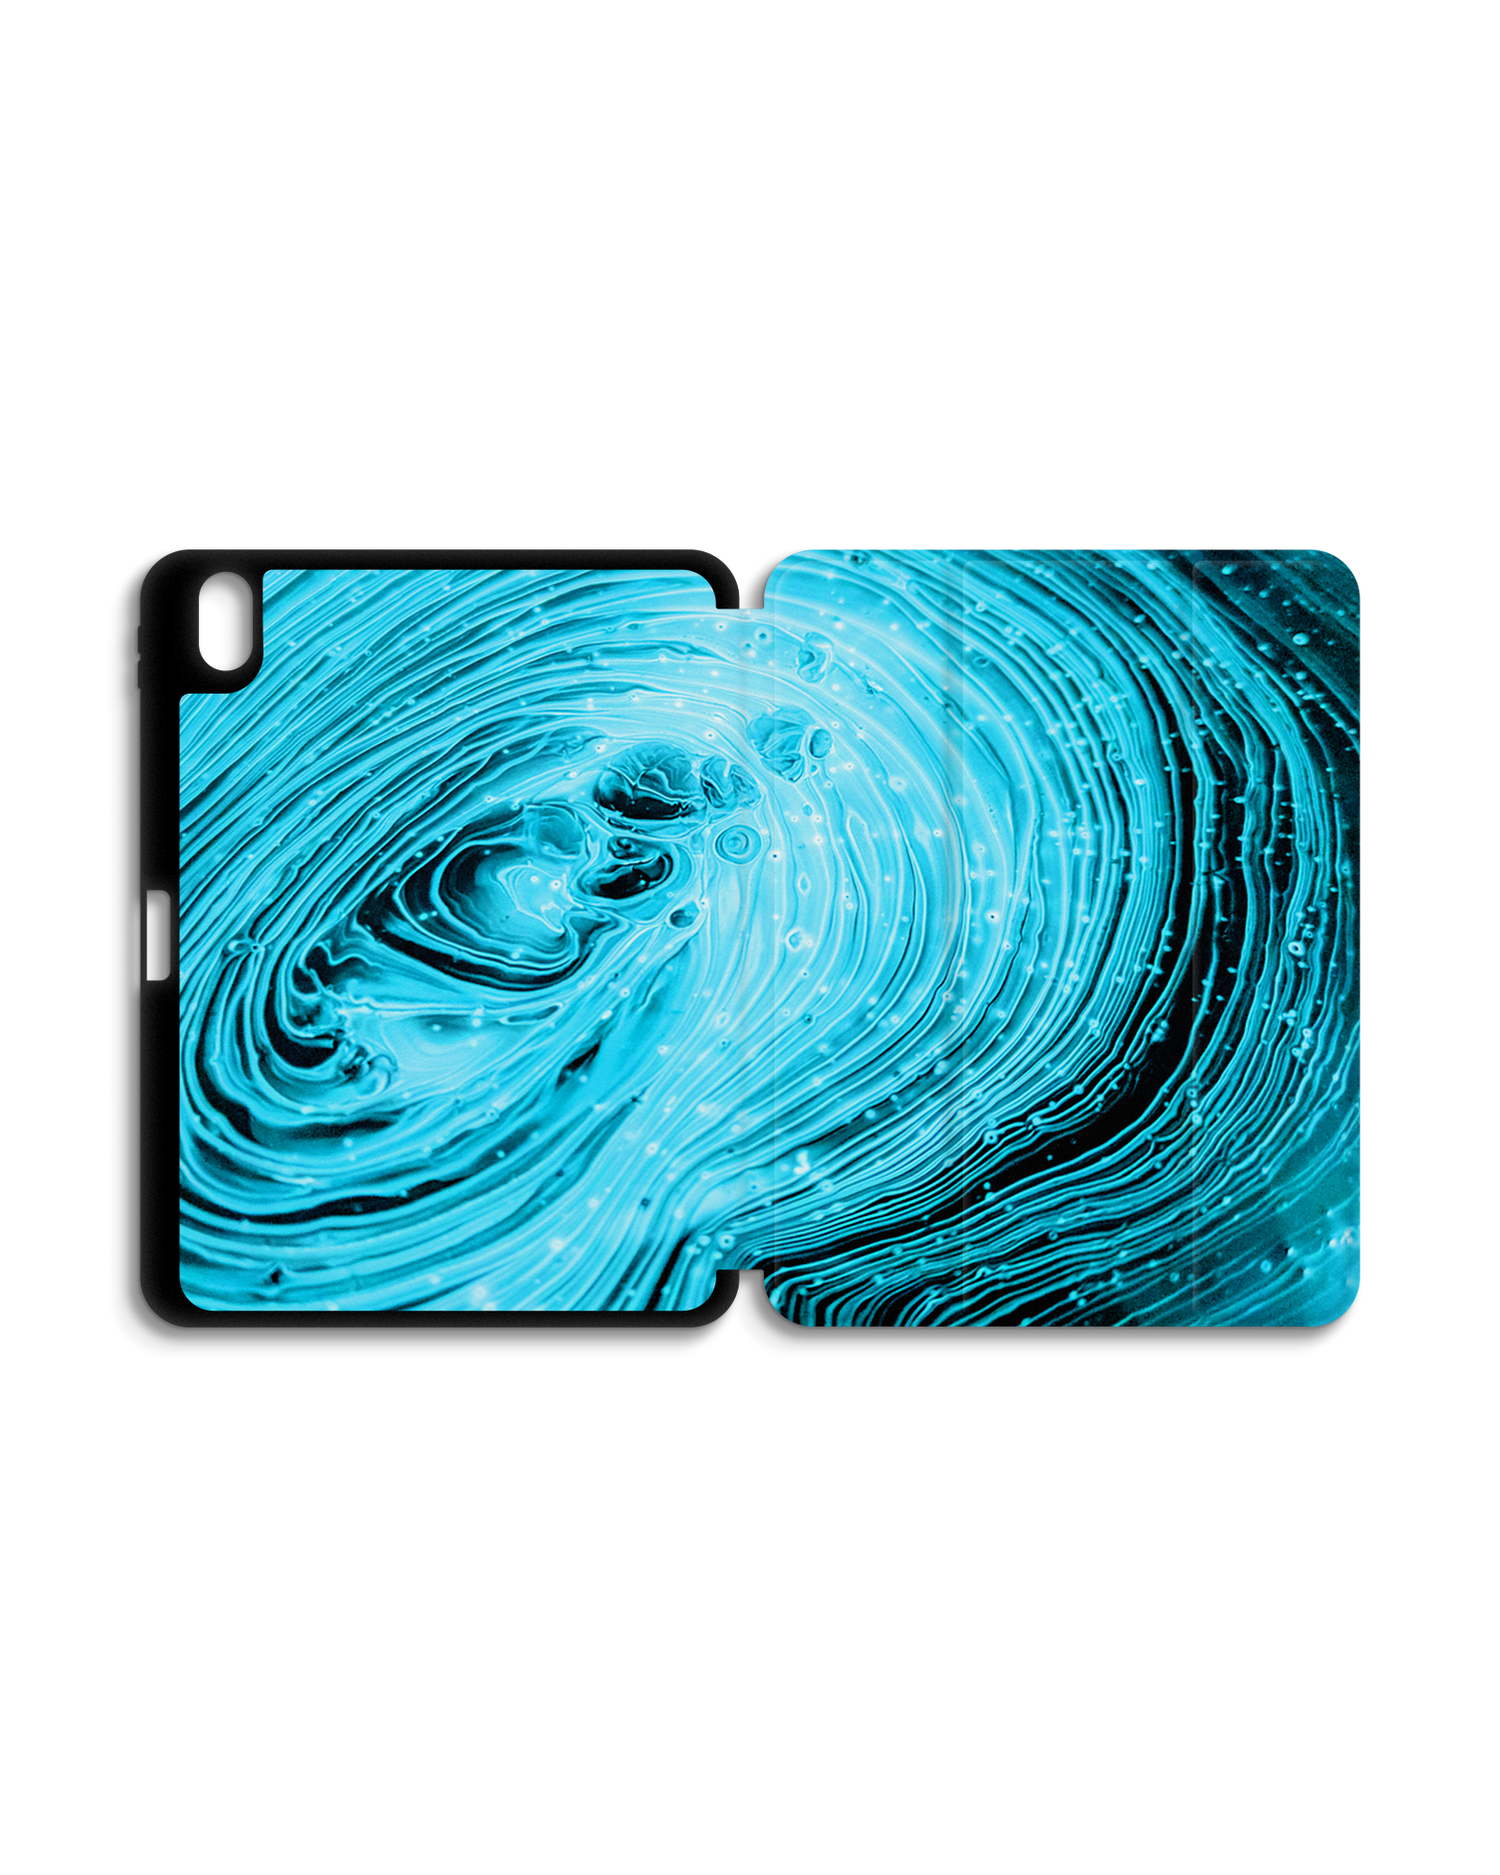 Turquoise Ripples iPad Case with Pencil Holder for Apple iPad (10th Generation): Opened exterior view